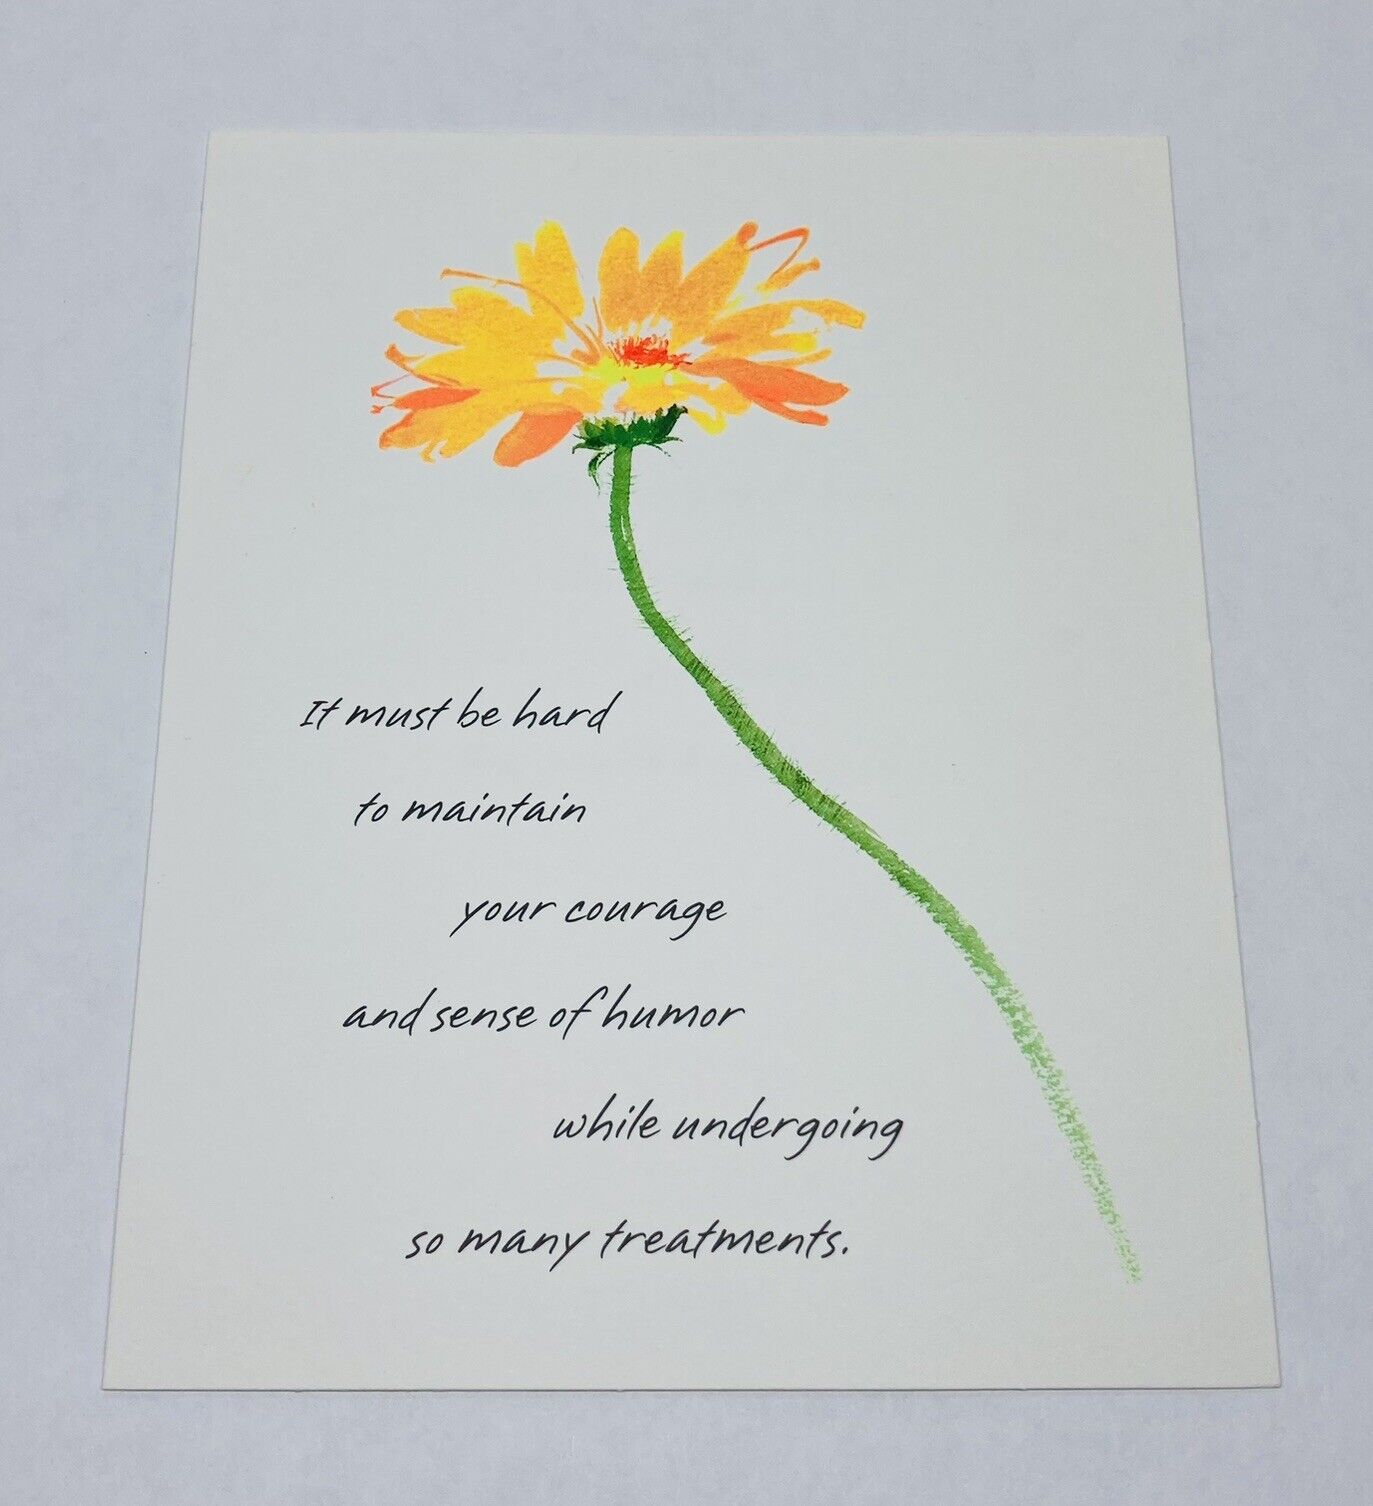 VTG Hallmark Get Well Card “Maintain Your Courage” Painted Flower Art P4